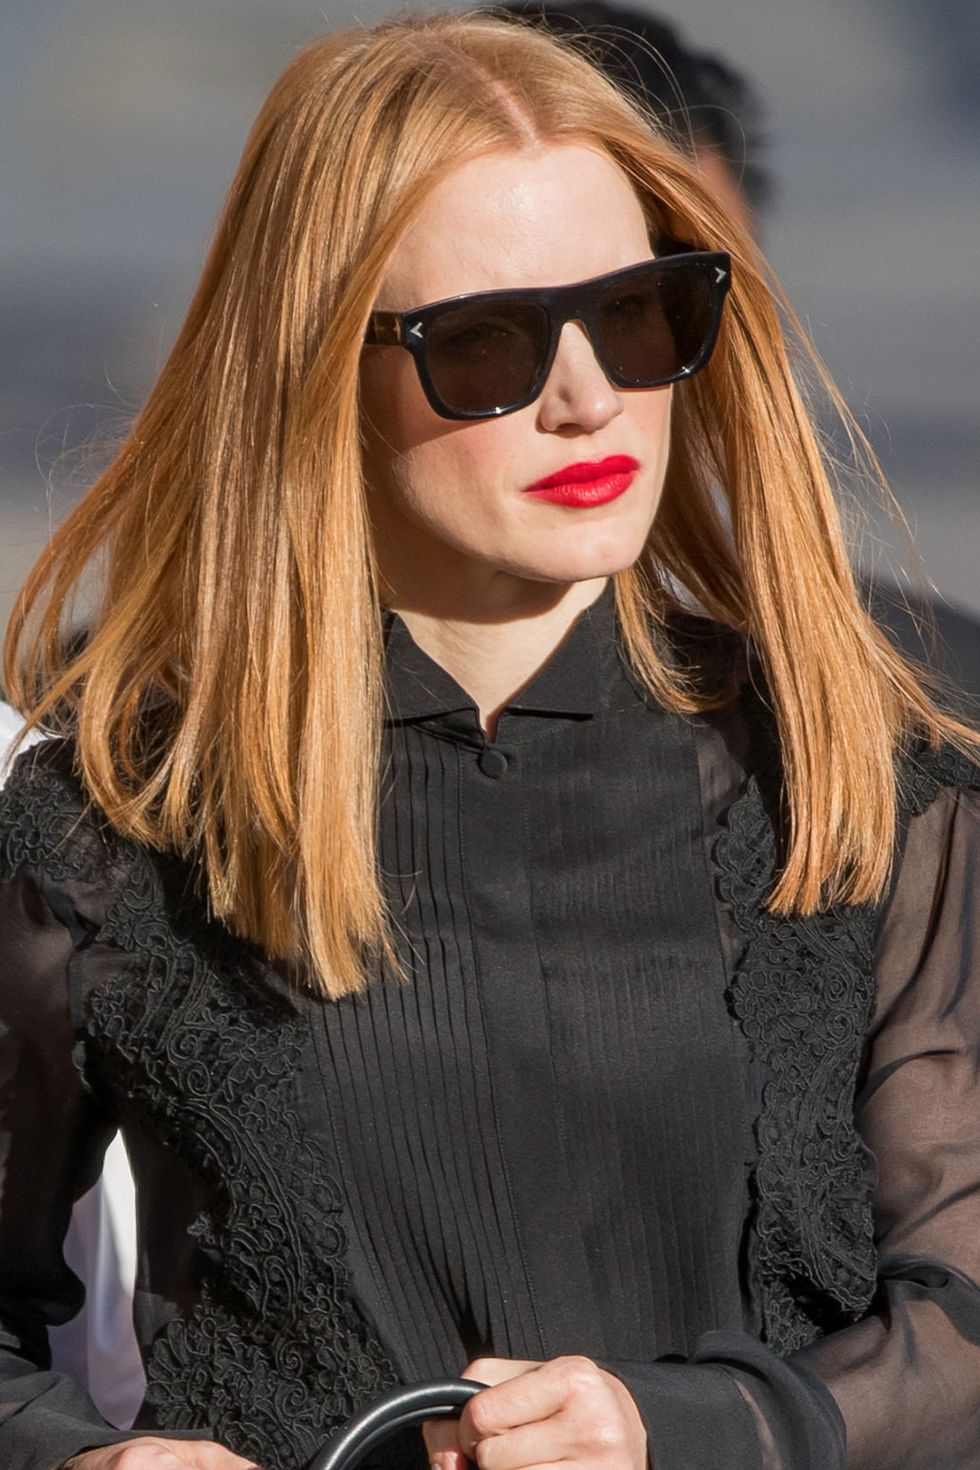 <p>Jessica Chastain's blunt cut is mostly straight except at the ends, where it's flicked inward <em data-redactor-tag="em" data-verified="redactor">just</em> a bit. It makes her cut seem just a little more styled.</p>